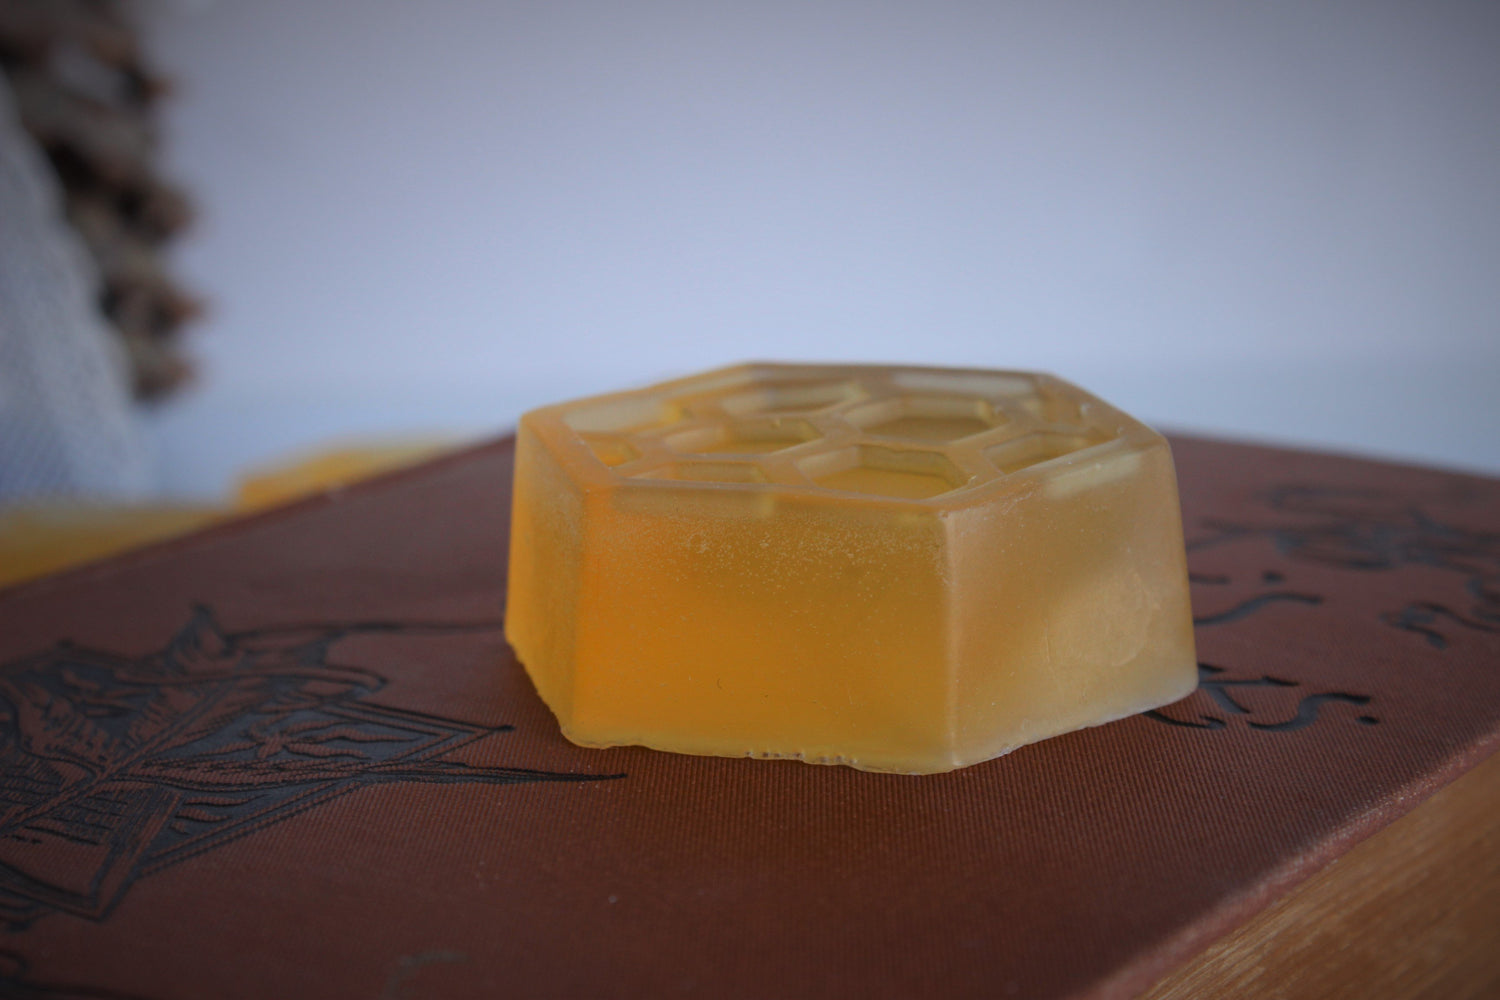 "The Bees Knees" Handmade Beeswax Candle and Honey Soap Set